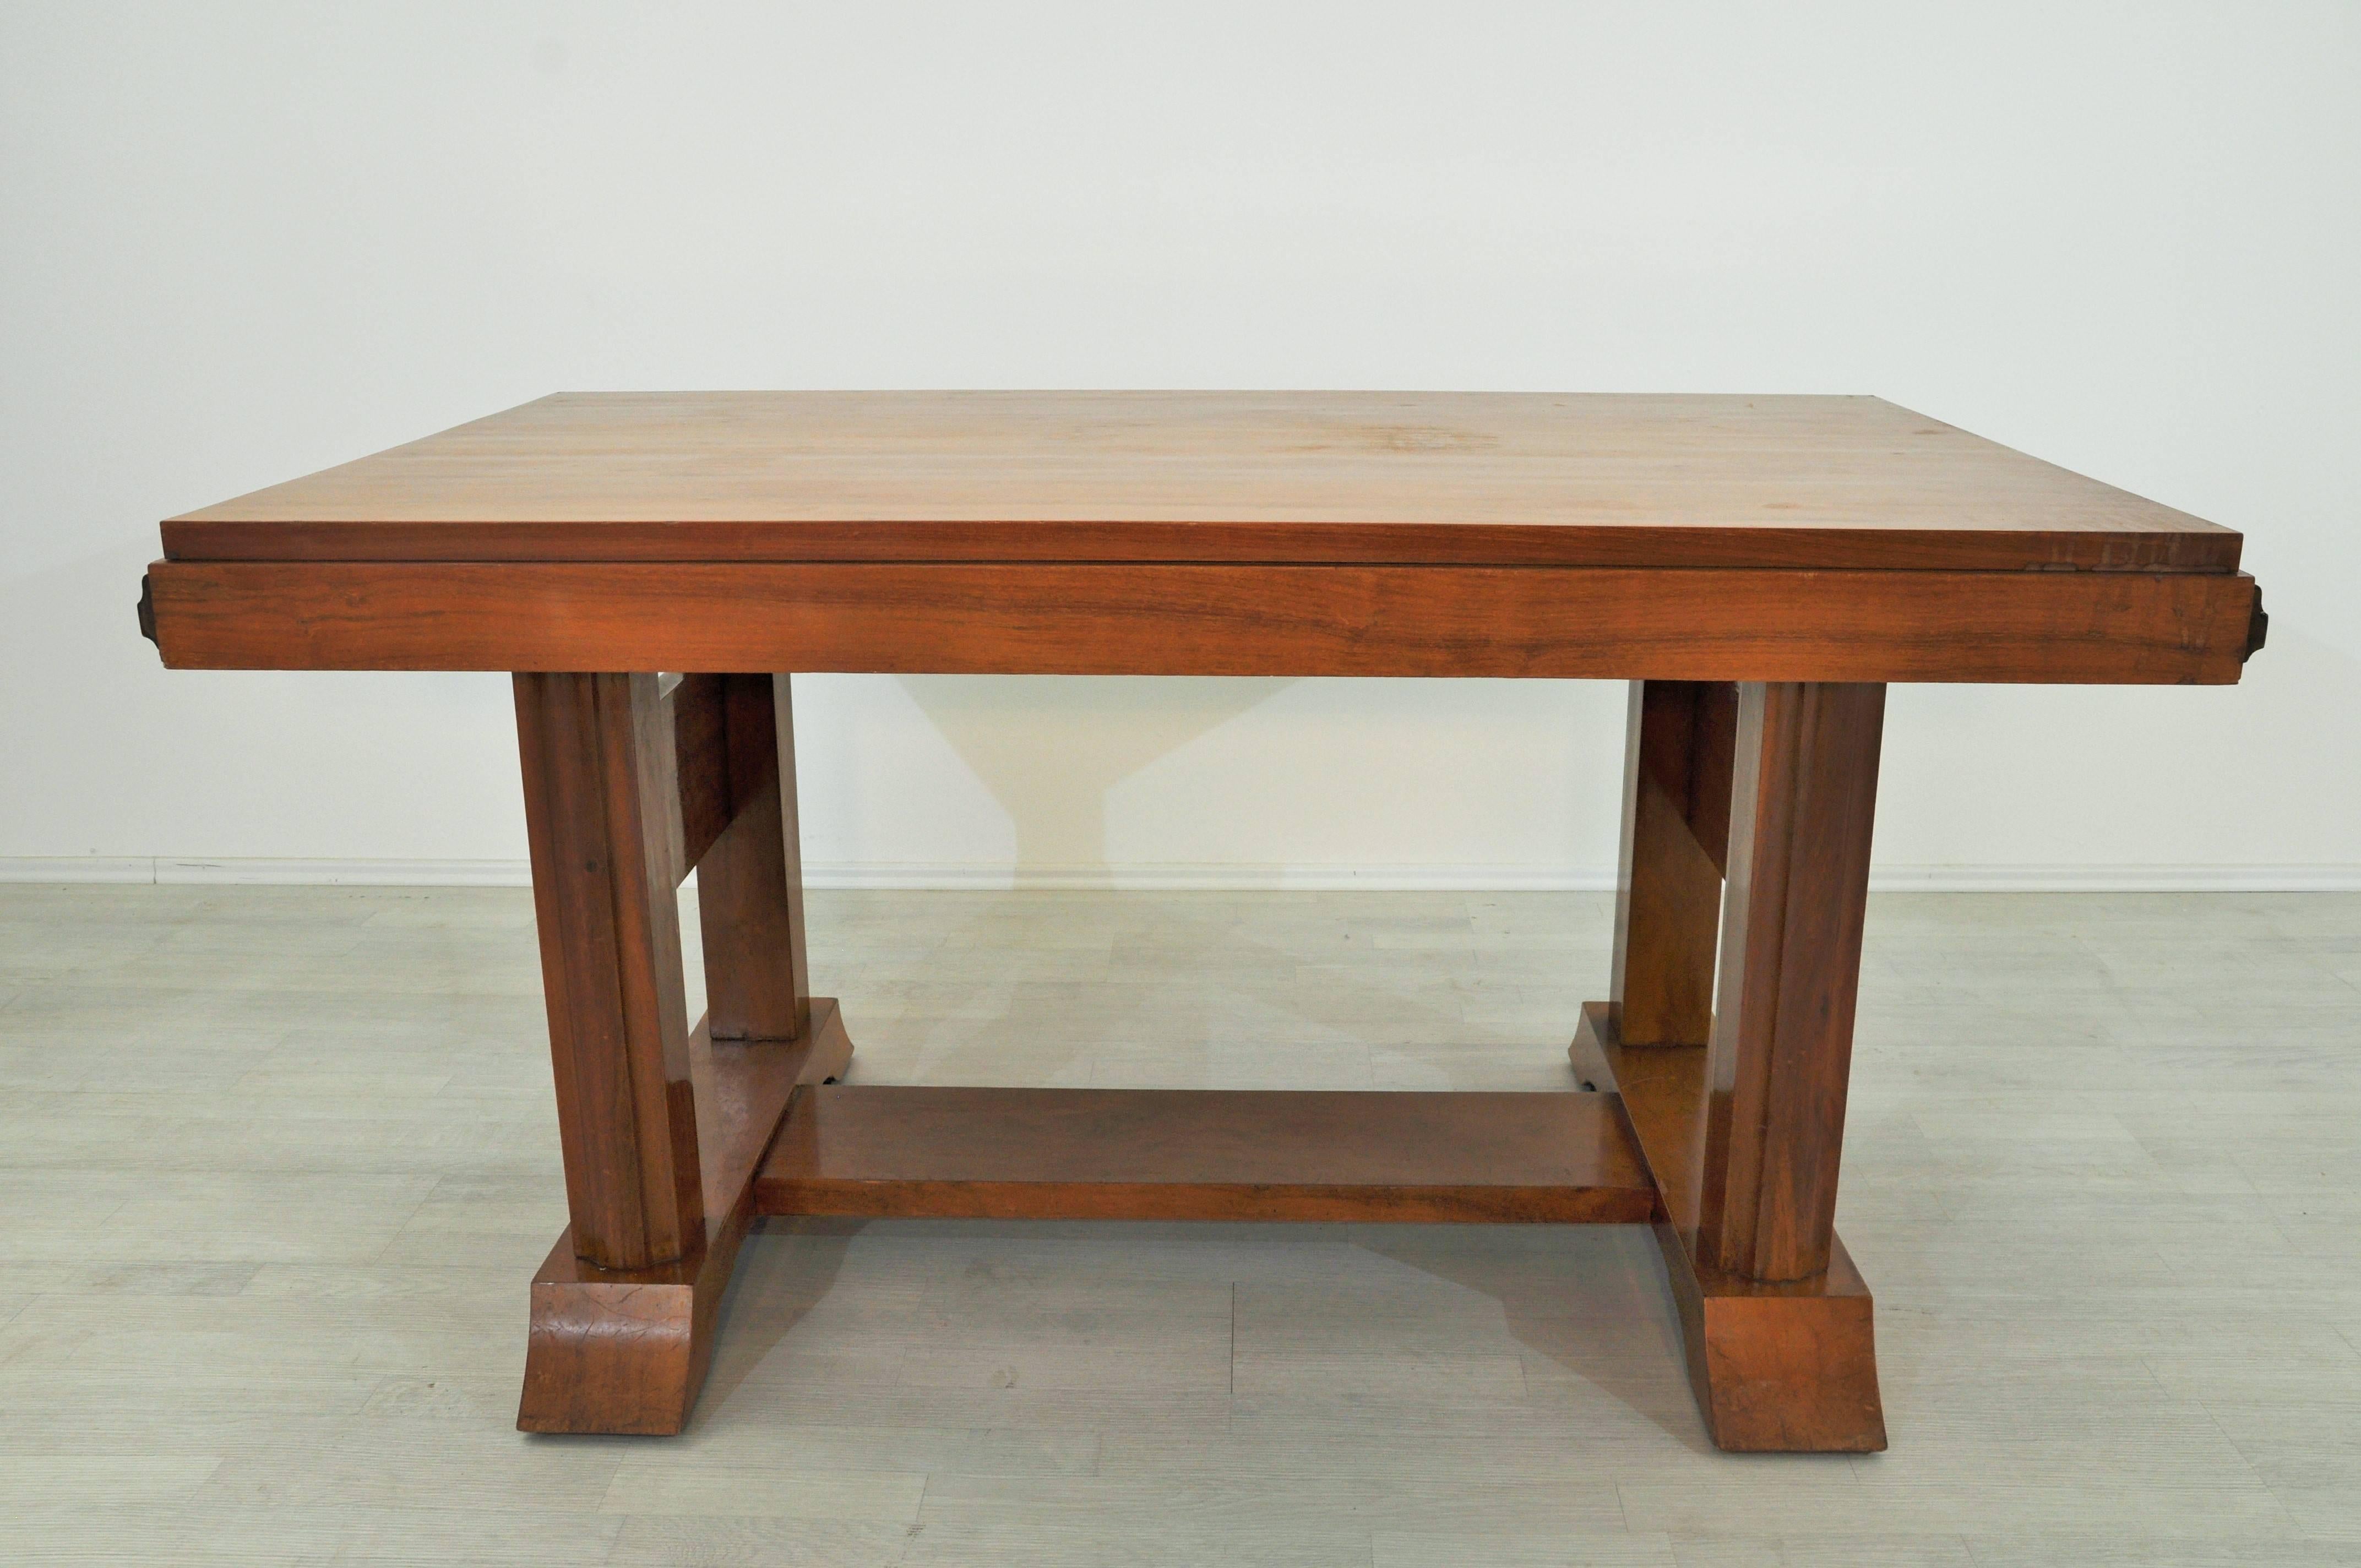 Beautiful wooden Art Deco dining table for your living room. Tabletop with walnut veneer and a rare check pattern on the legs. The wonderful character of the Art Deco design reassembles in this table.

 Original vintage walnut table.
 Beautiful